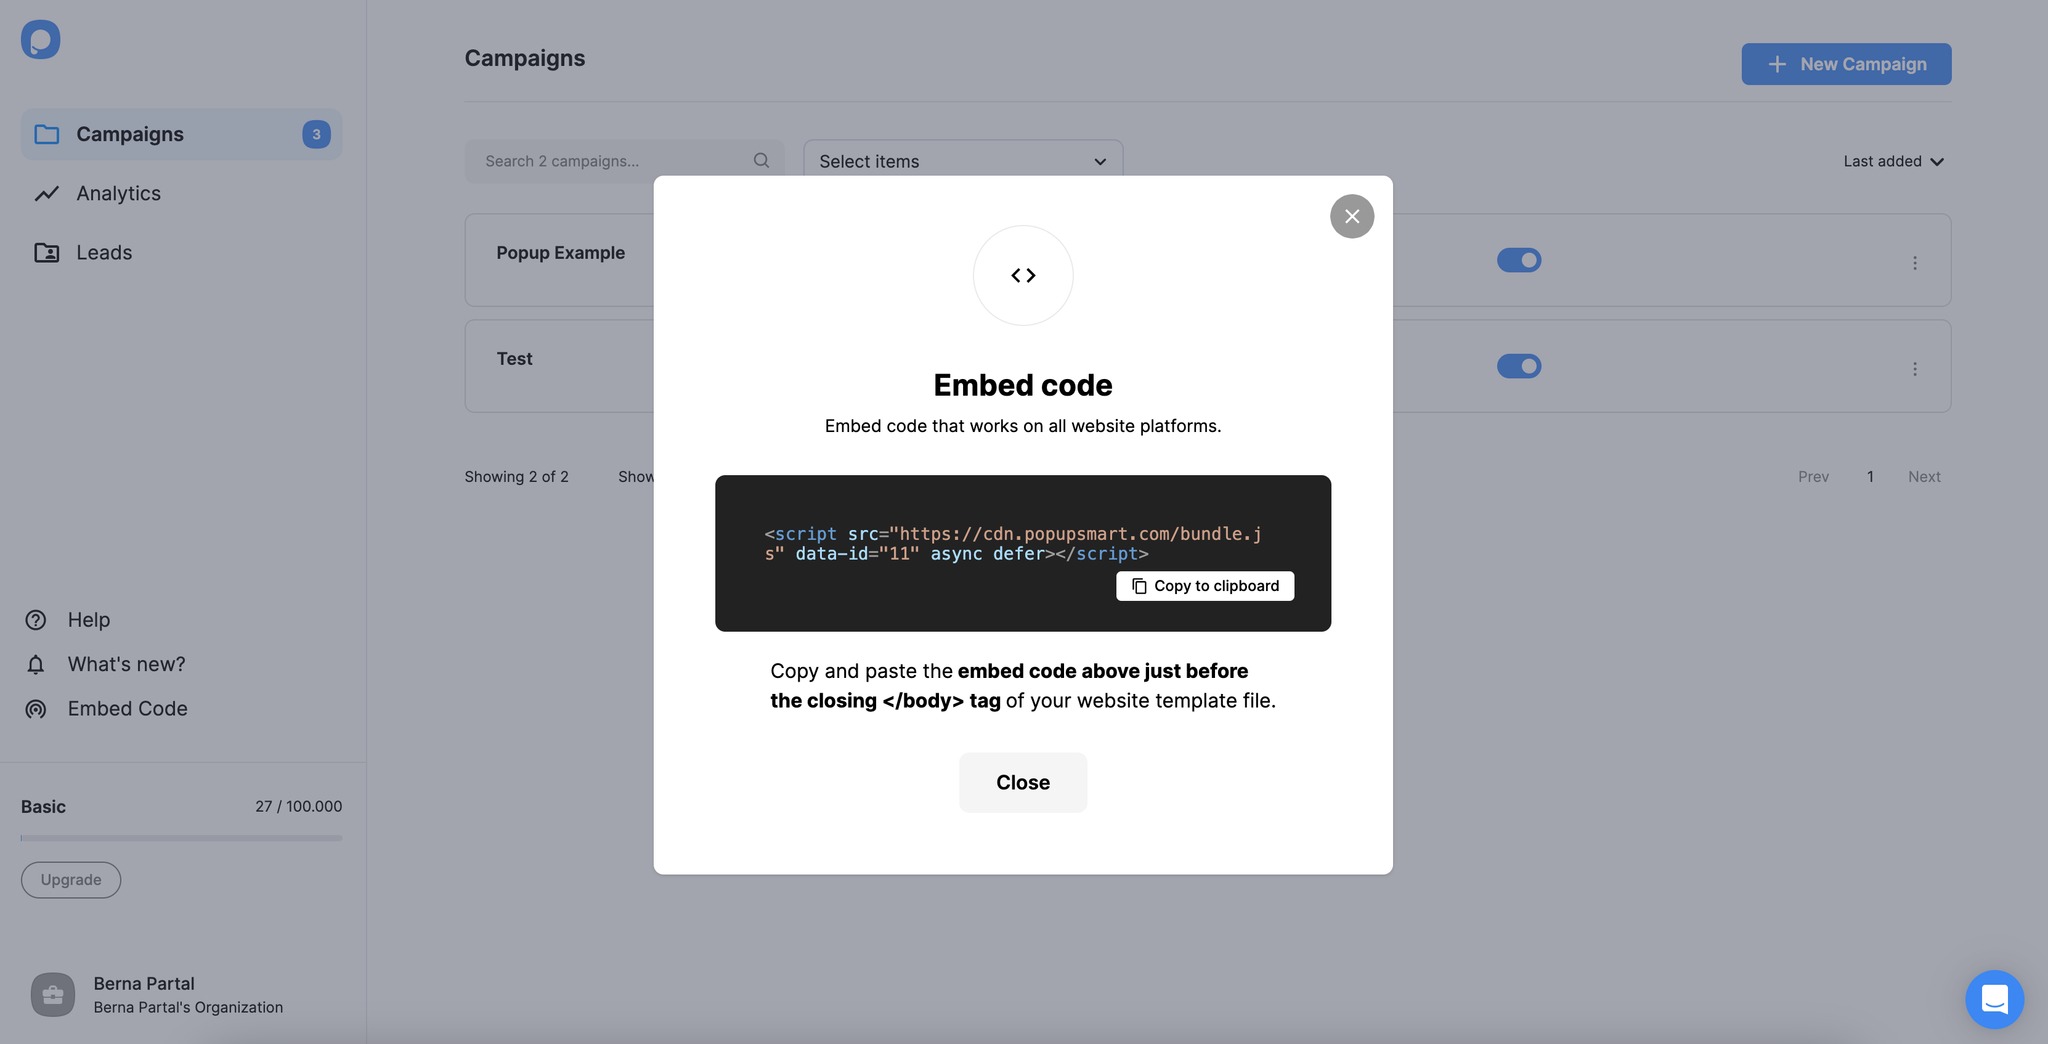 Copying Embed Code to Clipboard